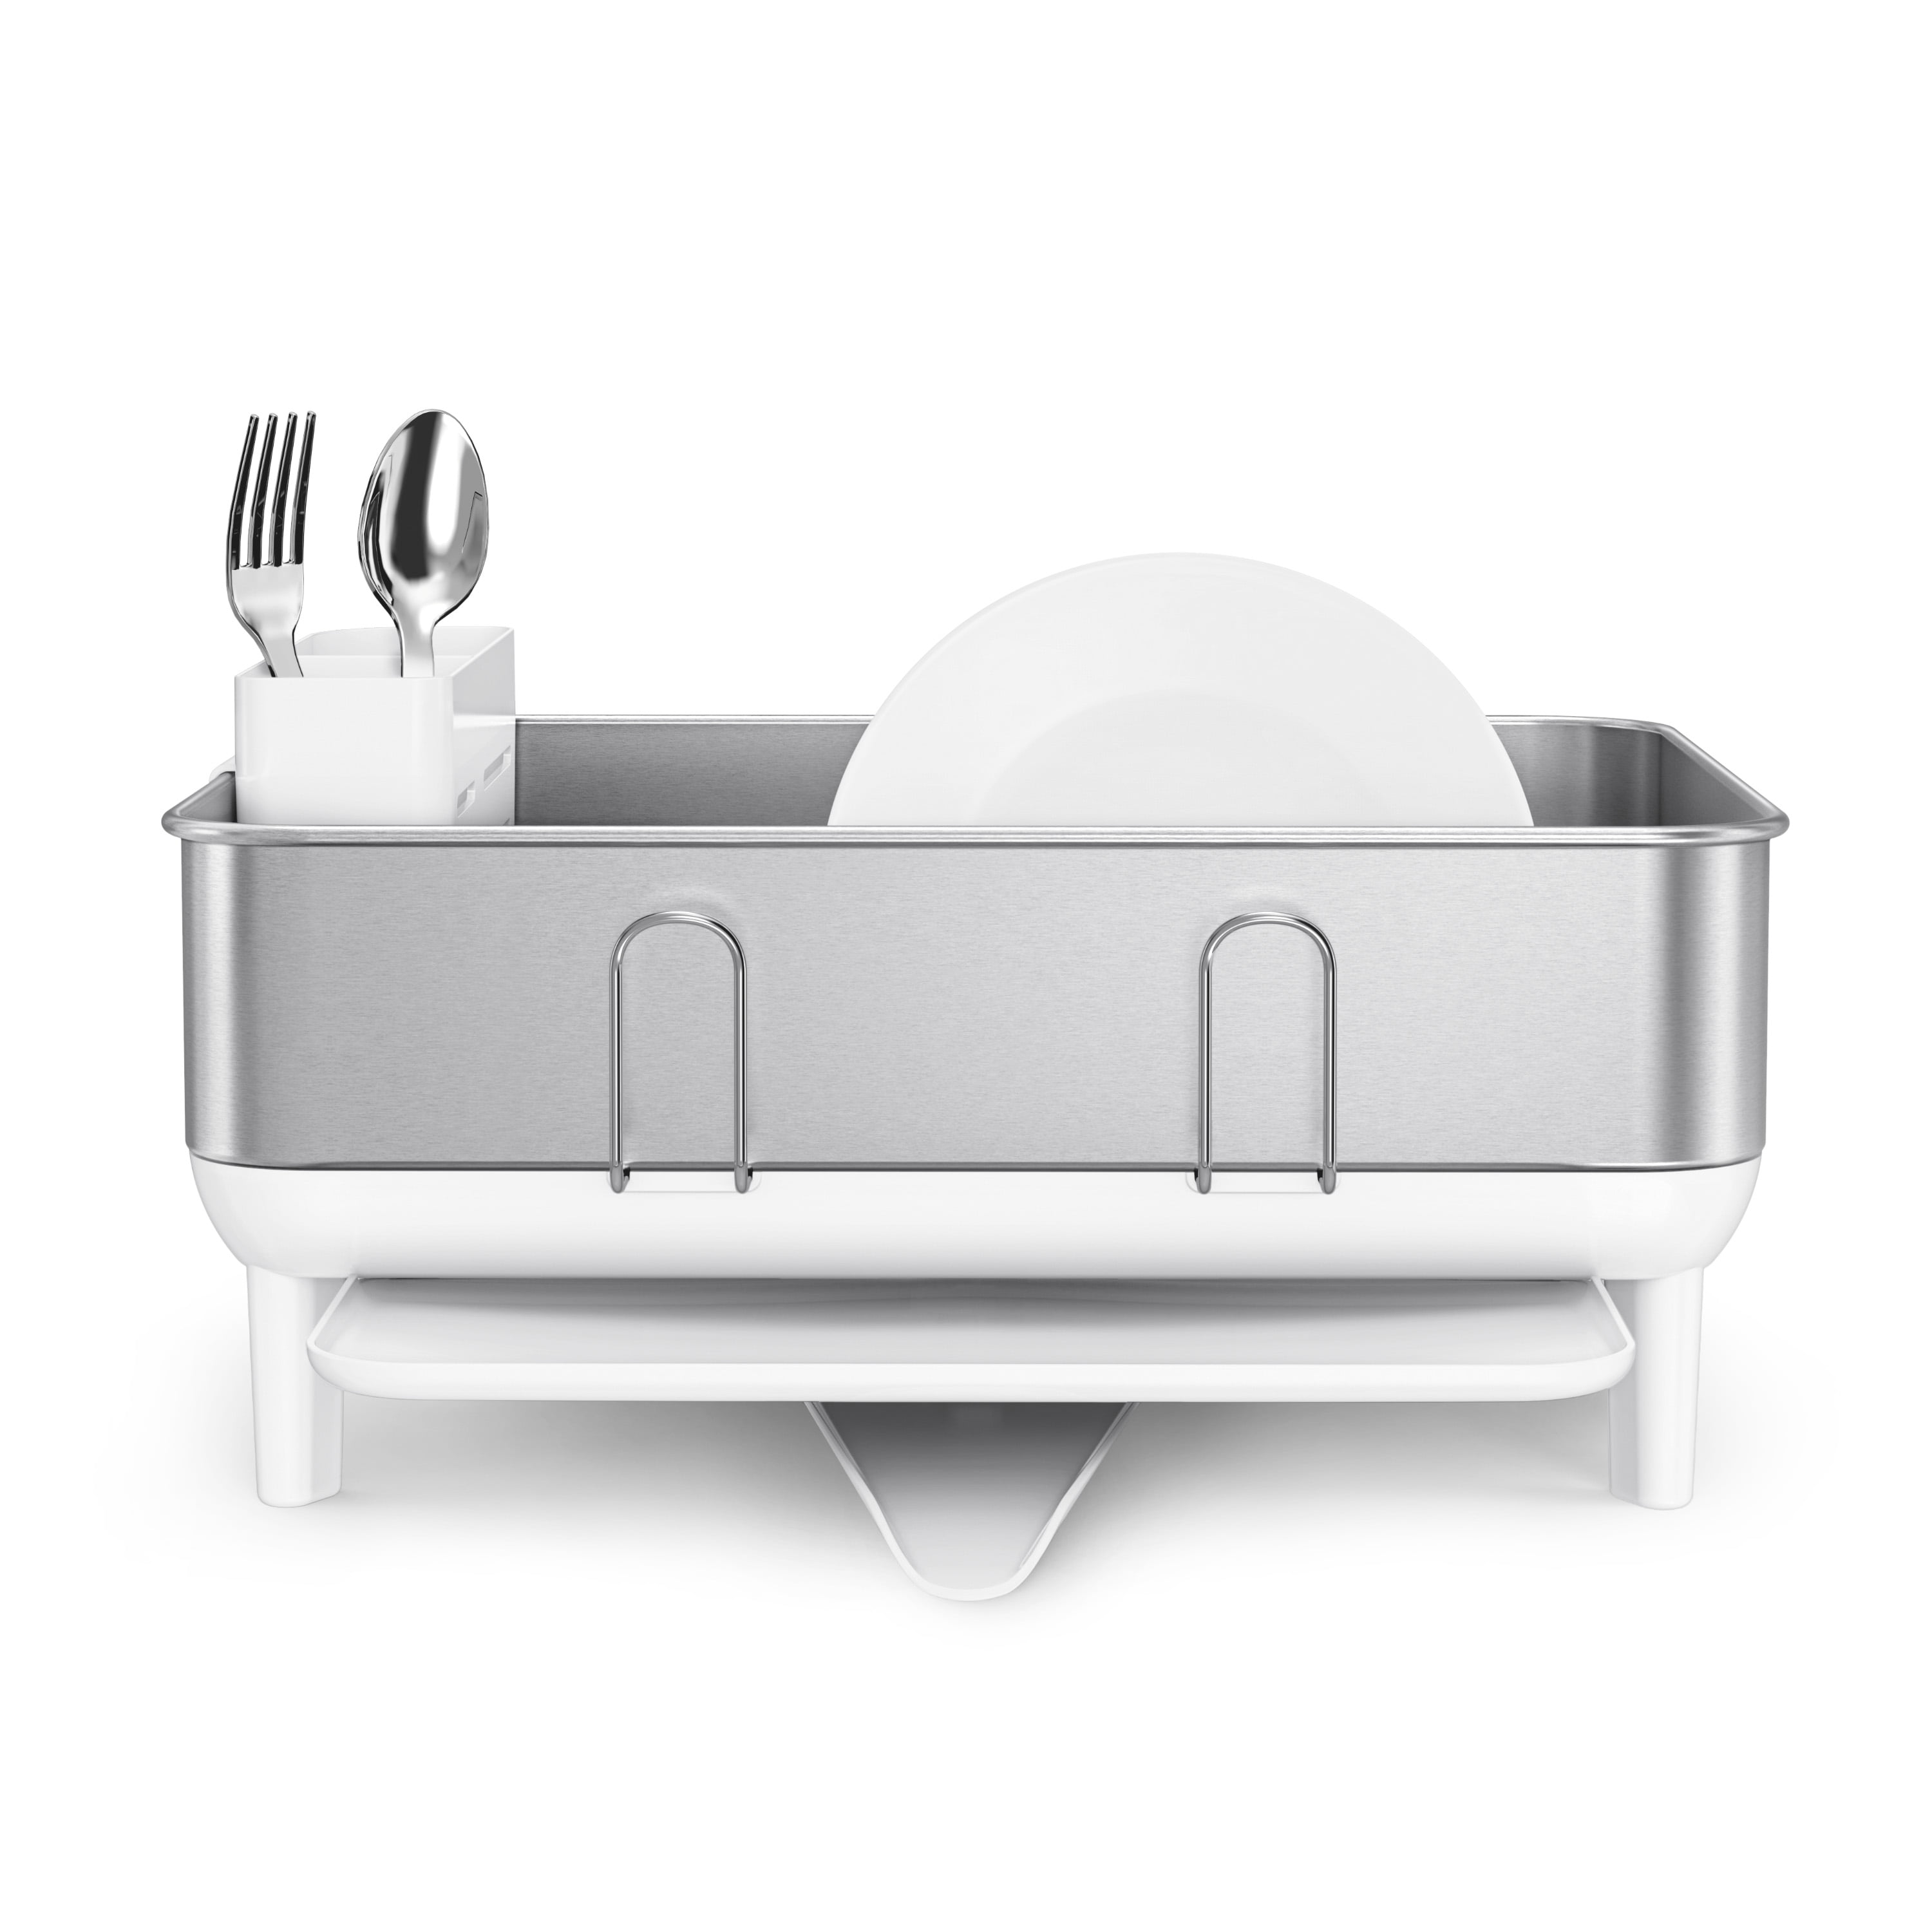 simplehuman - clean and calm never goes out of style ✨ all-white kitchens  help set the tone for a peaceful evening, and our white steel frame  dishrack fits in perfectly! plus it